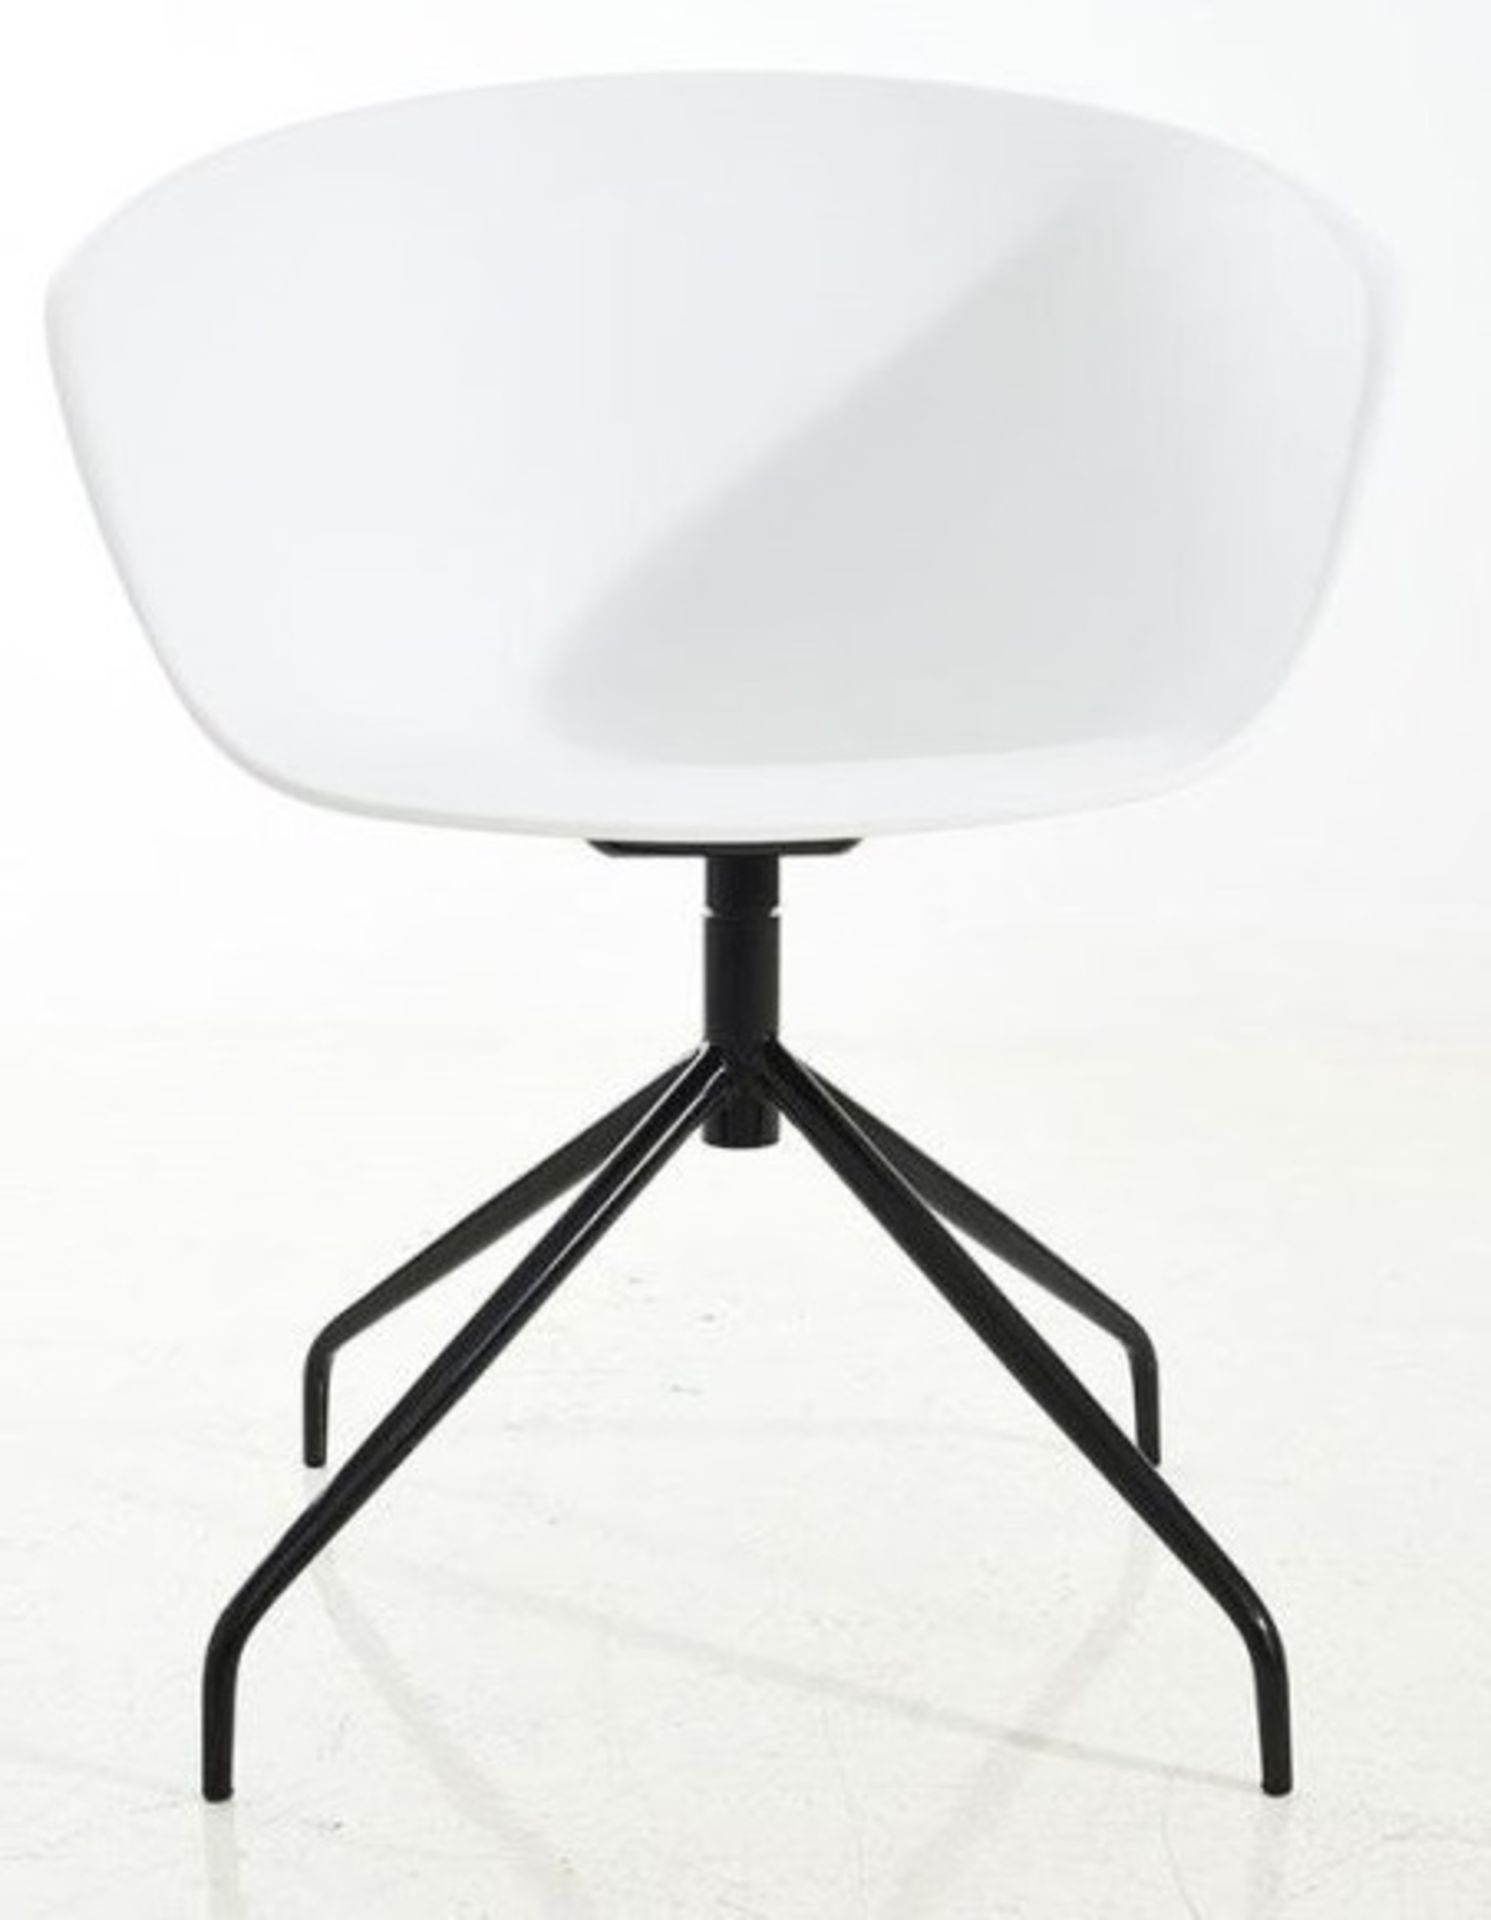 A Set Of 4 x Elegant 'NOVA' Swivel Dining Chairs With White Curved Seats And Black Metal Bases - - Image 4 of 4